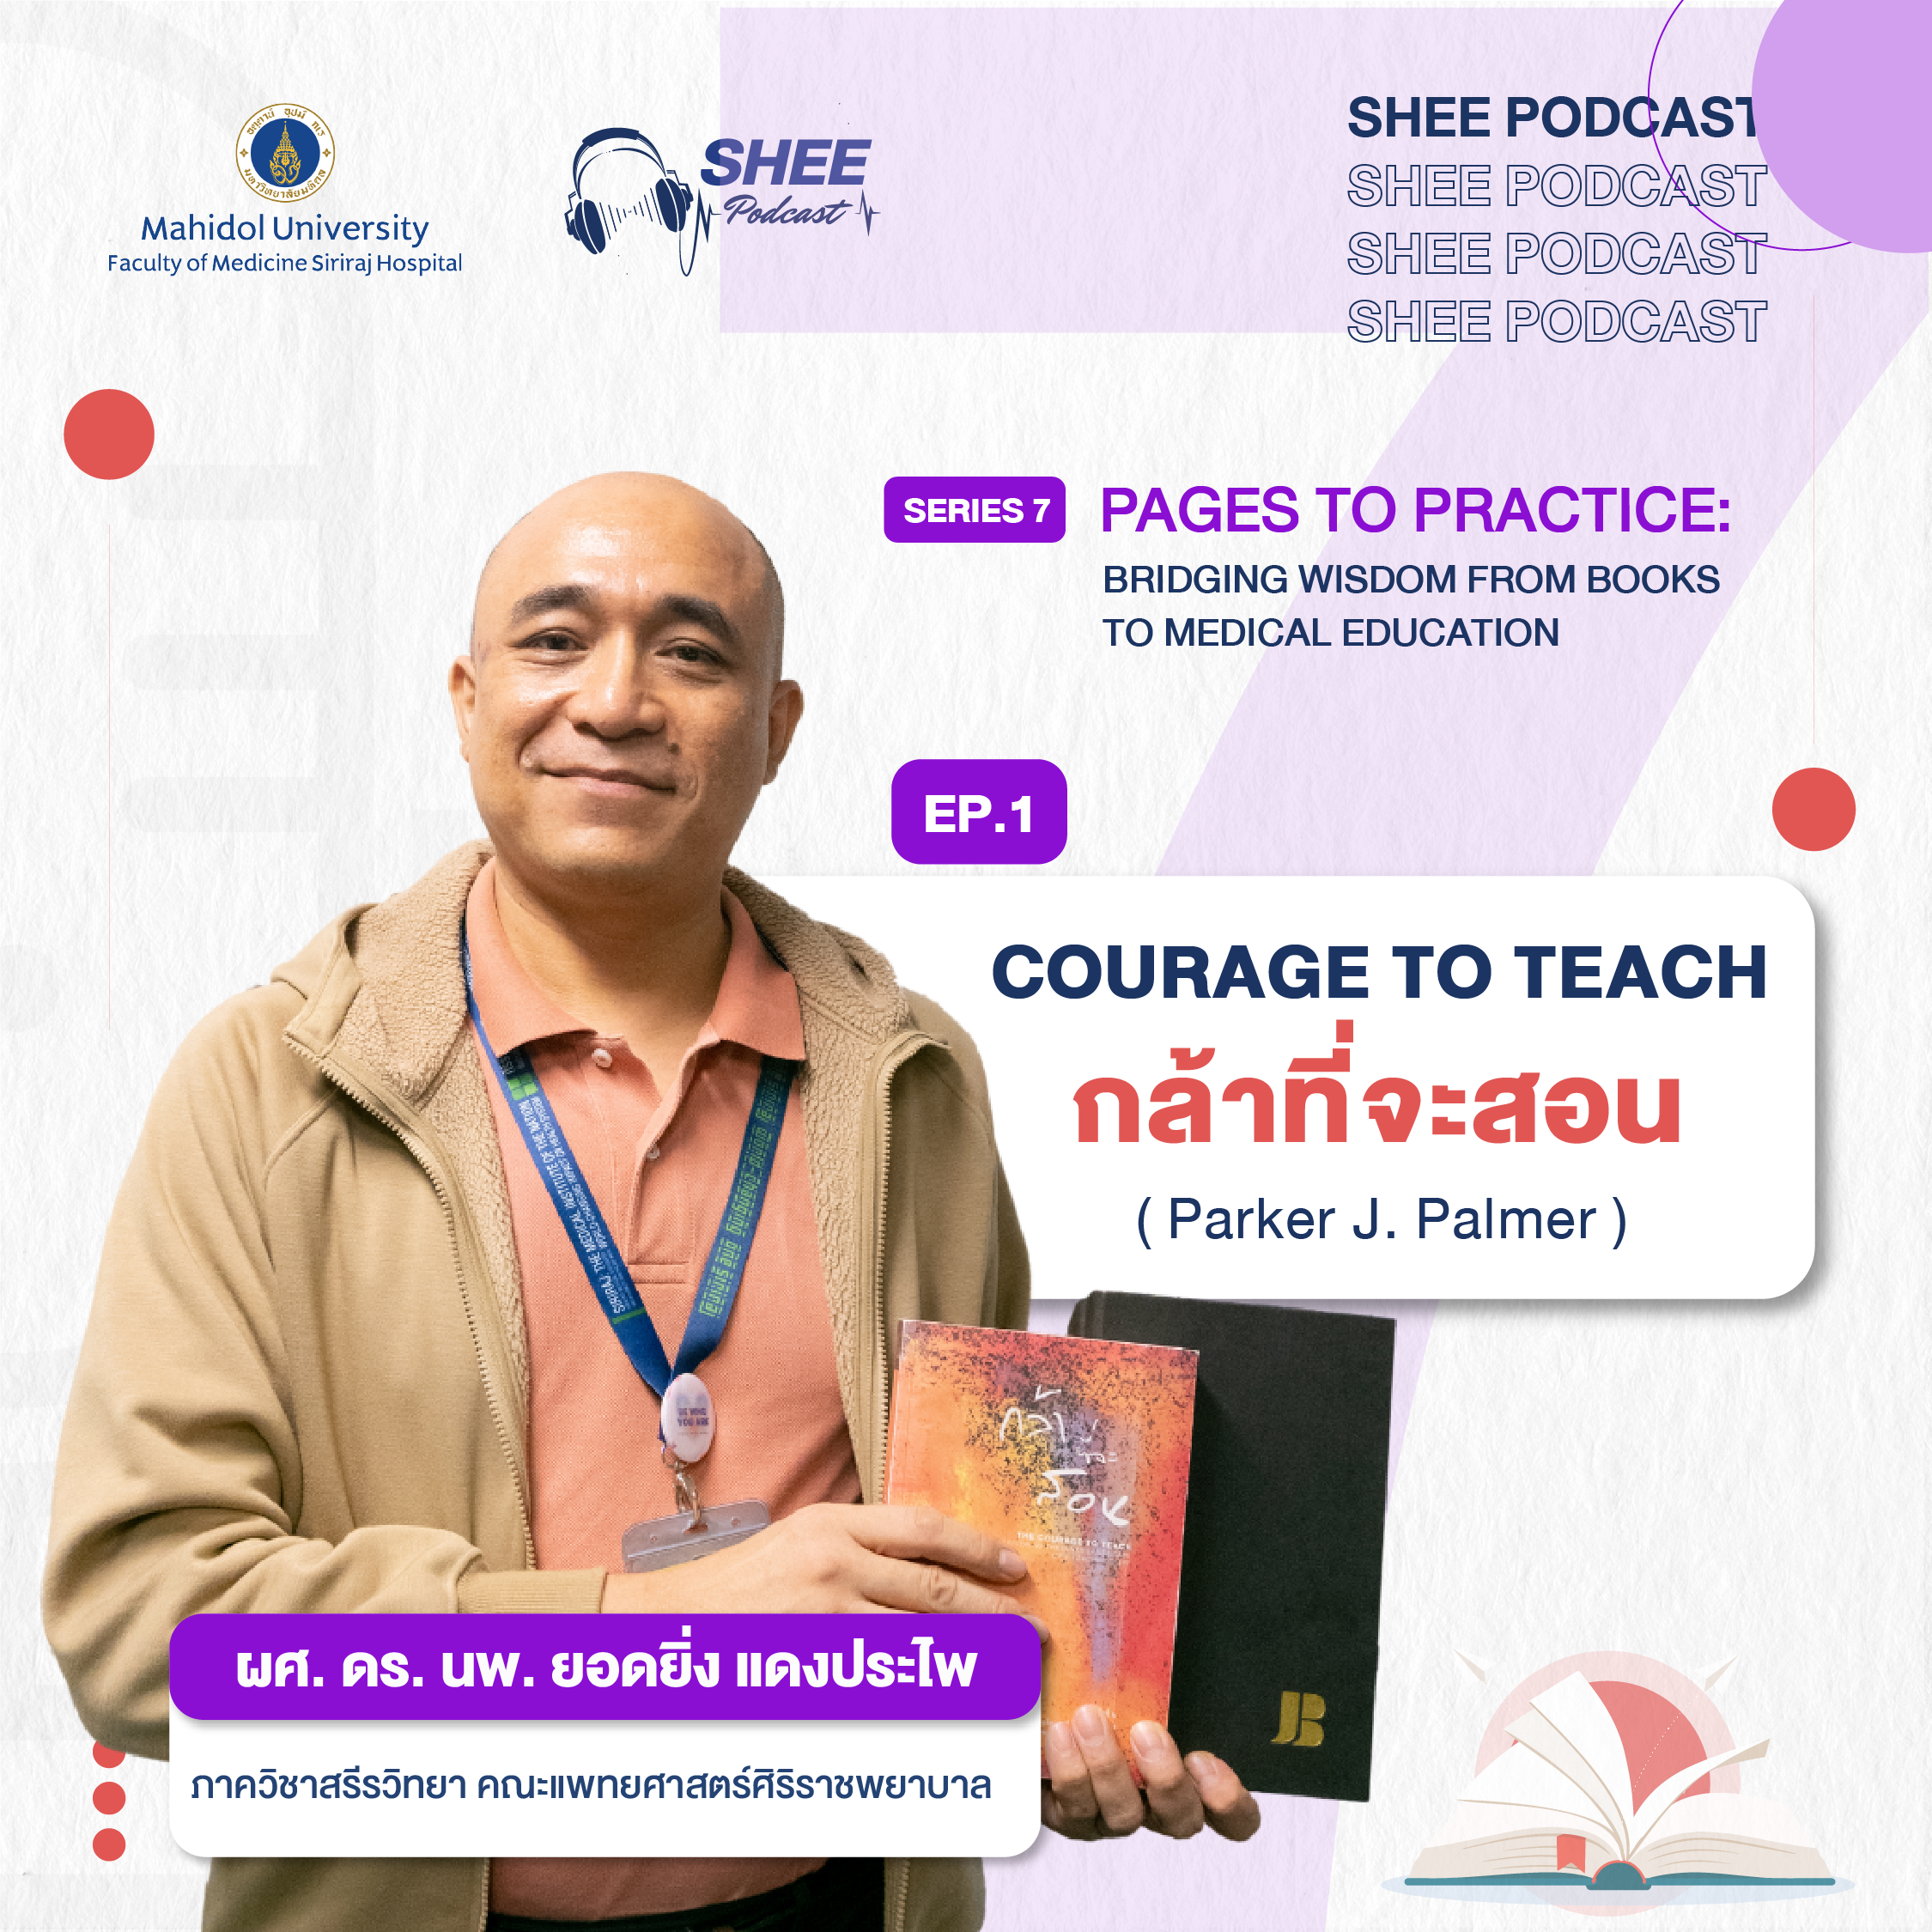 EP01 : Courage to teach by Parker J. Palmer